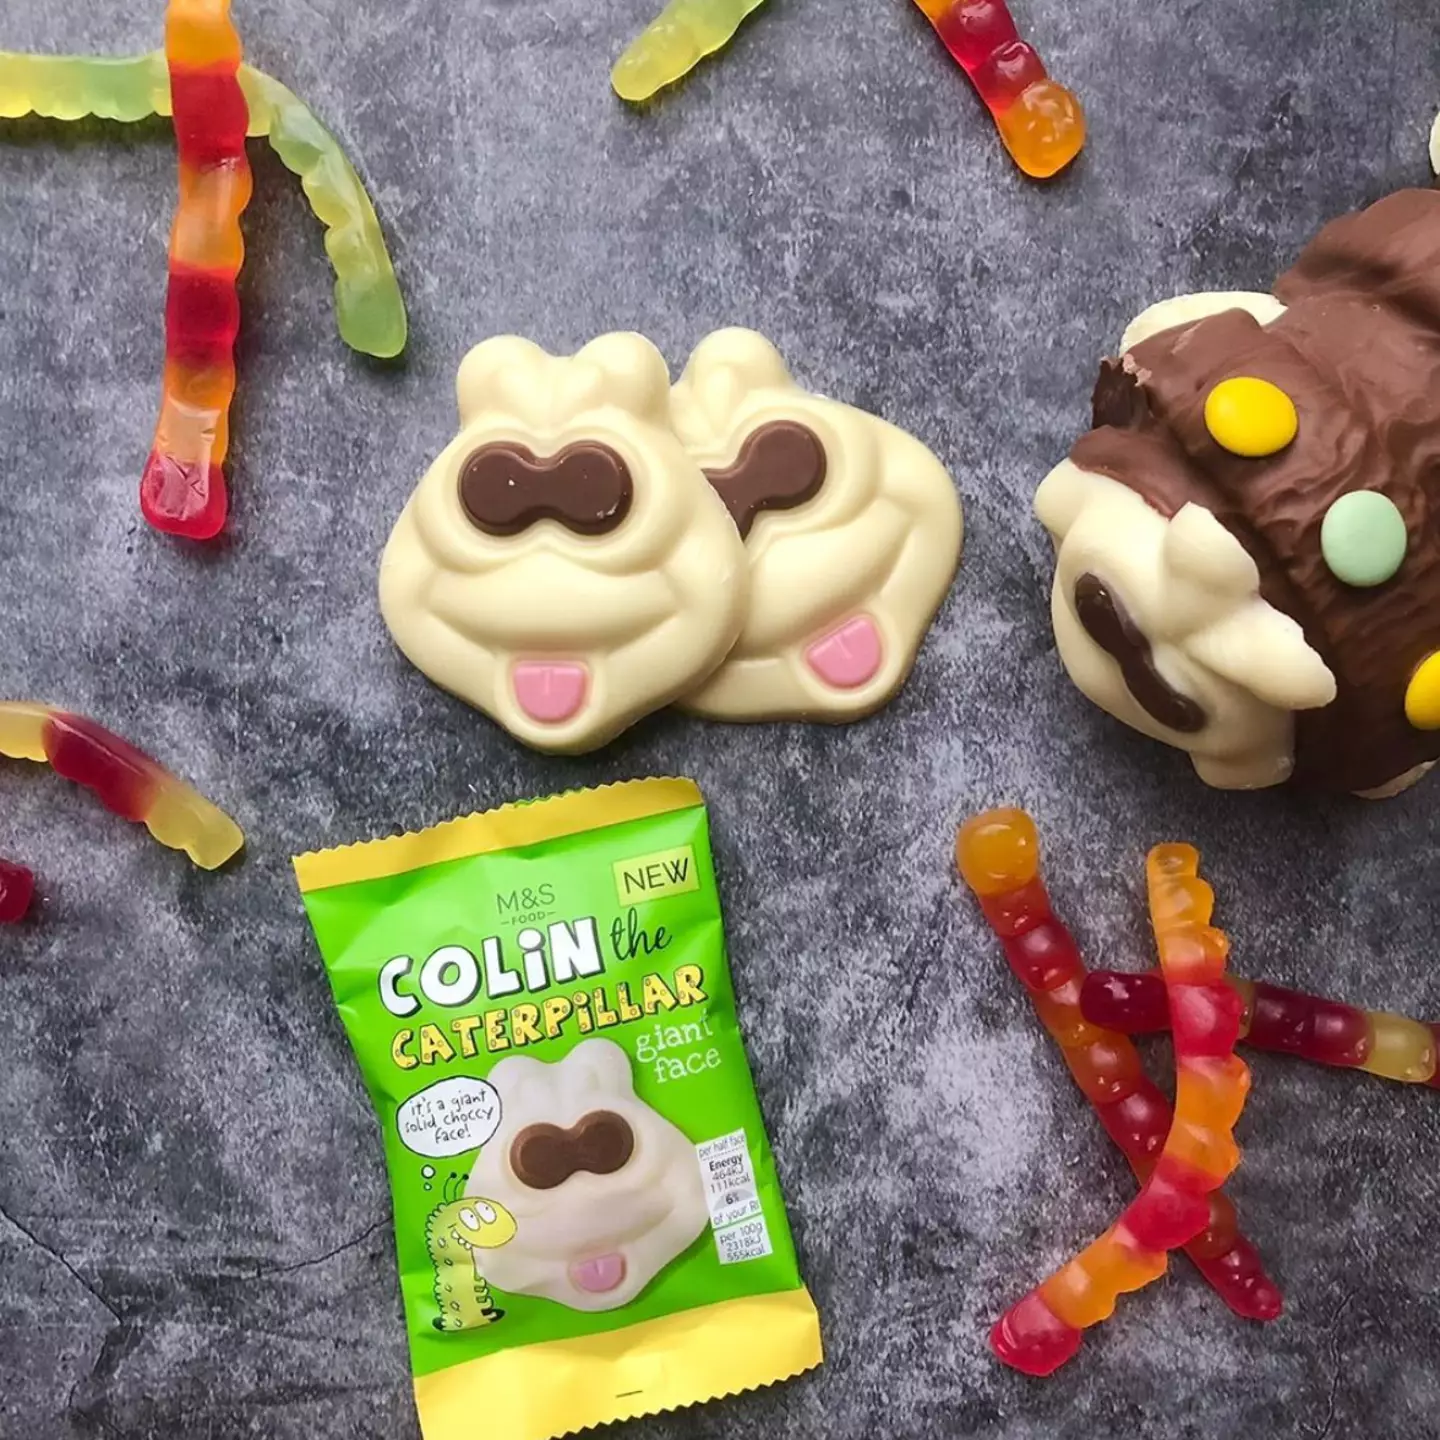 Marks & Spencer also sells regular white chocolate flavoured Colin faces (